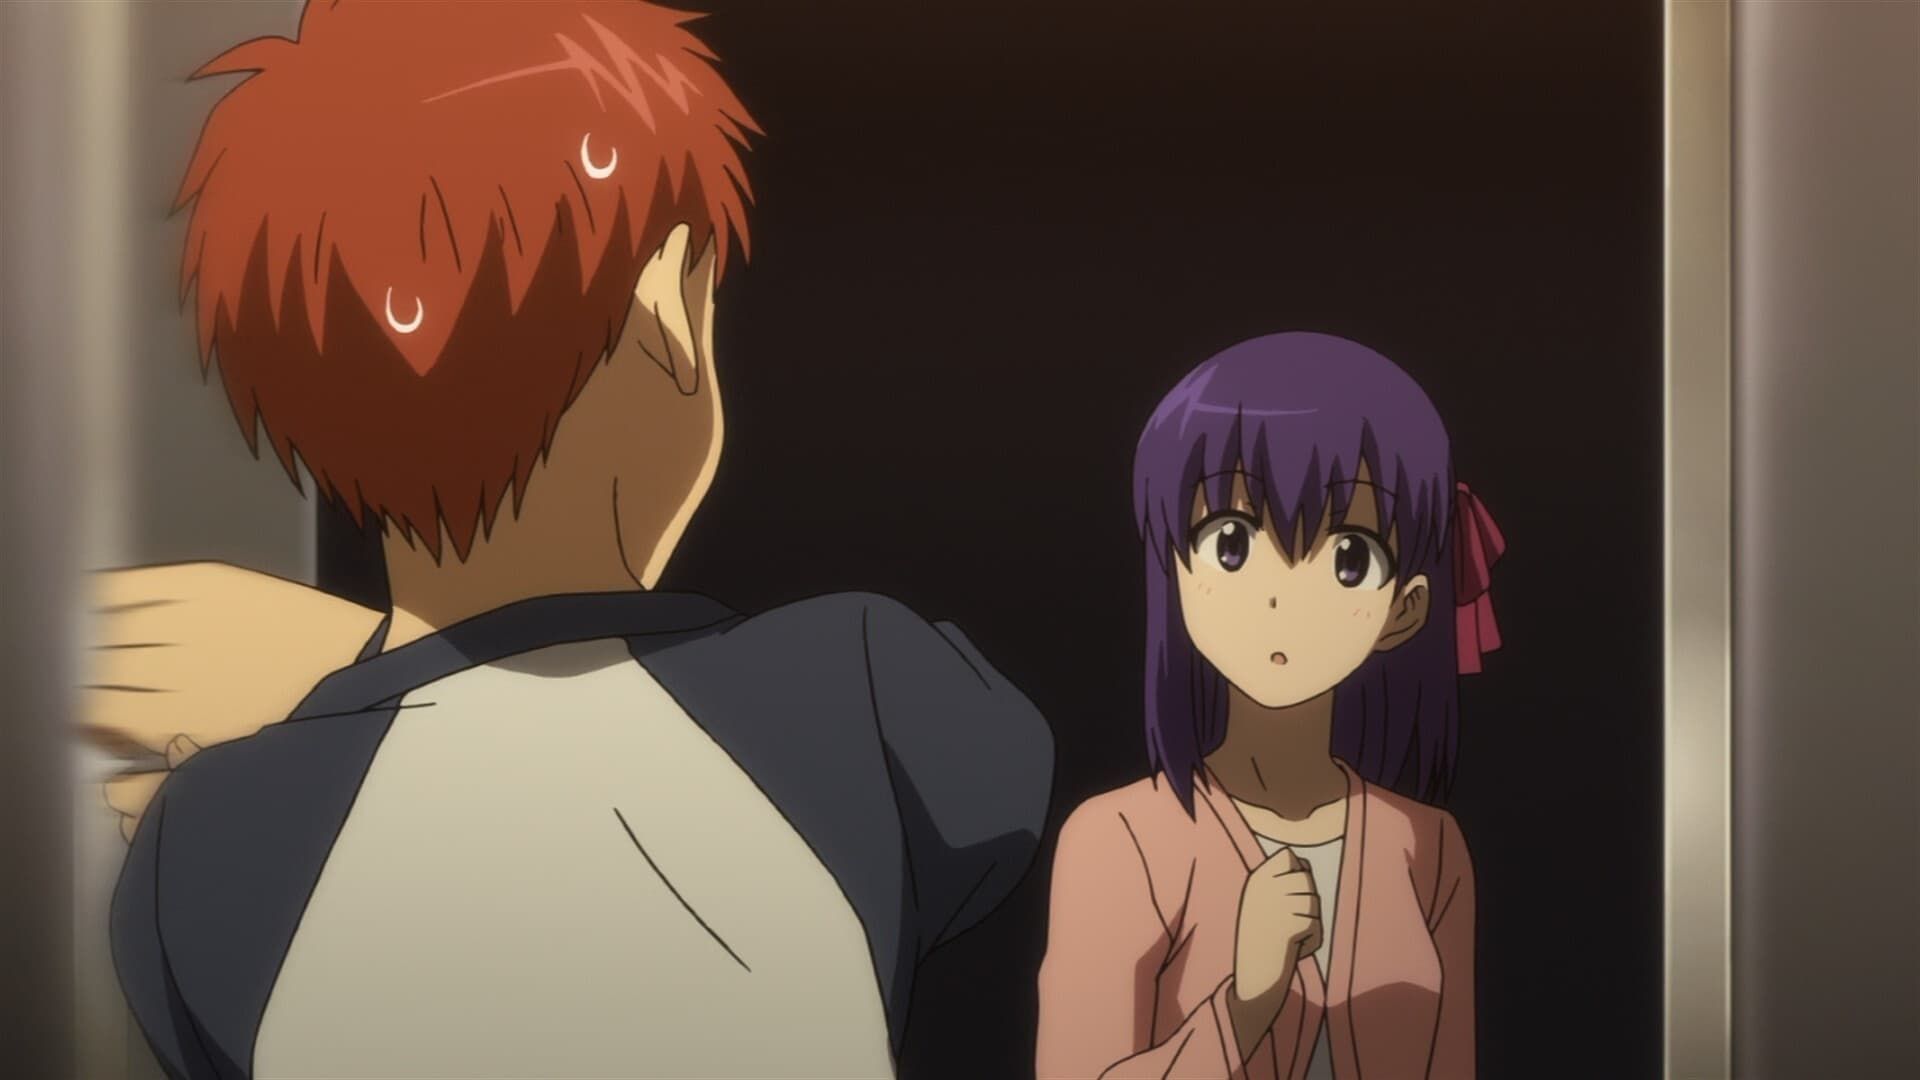 Fate/Stay Night: Unlimited Blade Works Episode 12 (Finale) – Fun